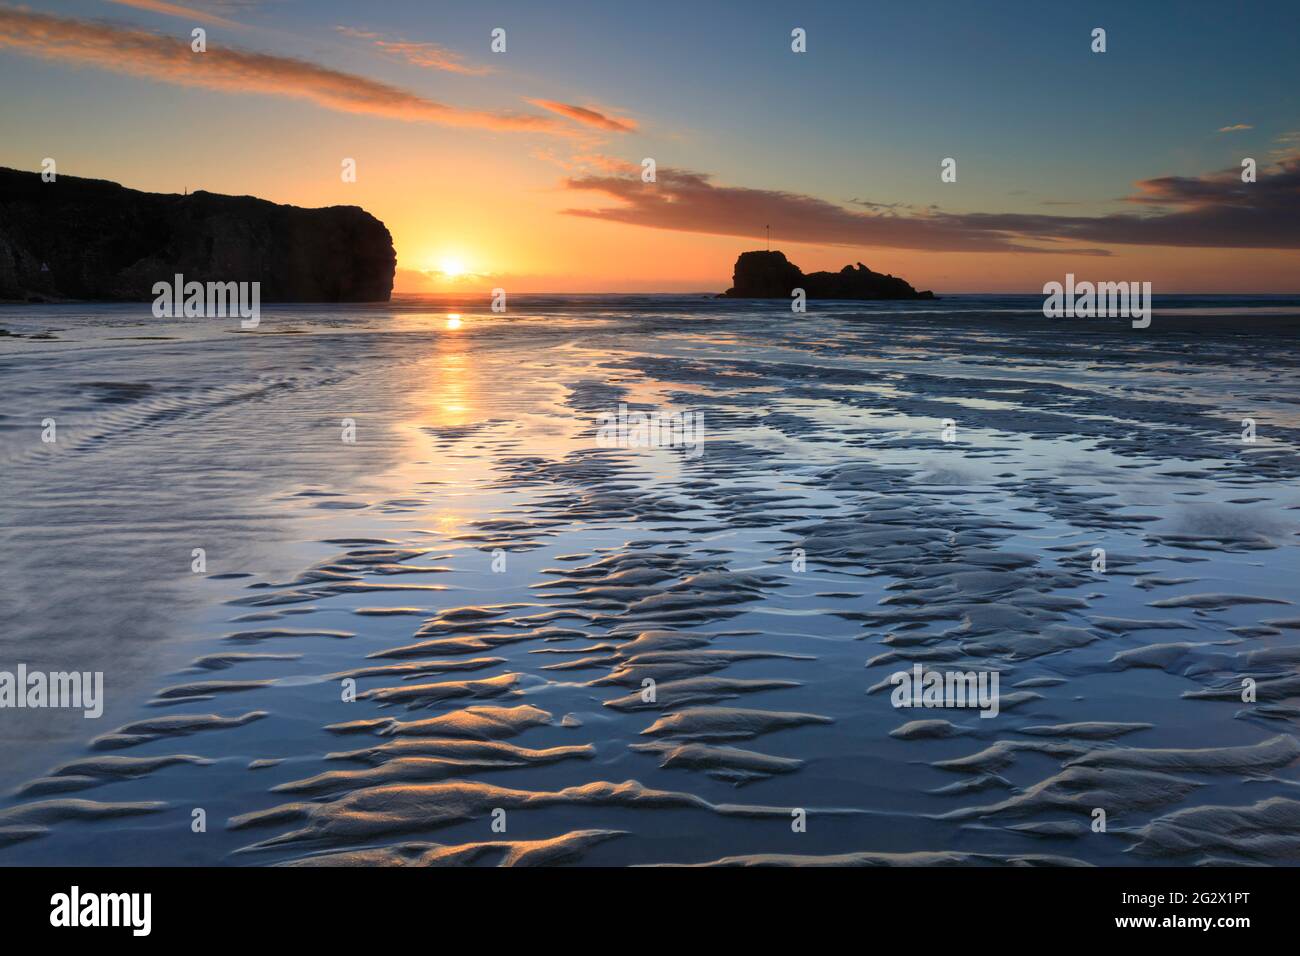 Sand ripples and a river leads the viewer's eye towards Chapel Rock on Cornwall's Perranporth Beach.  The image was captured shortly before sunset in Stock Photo